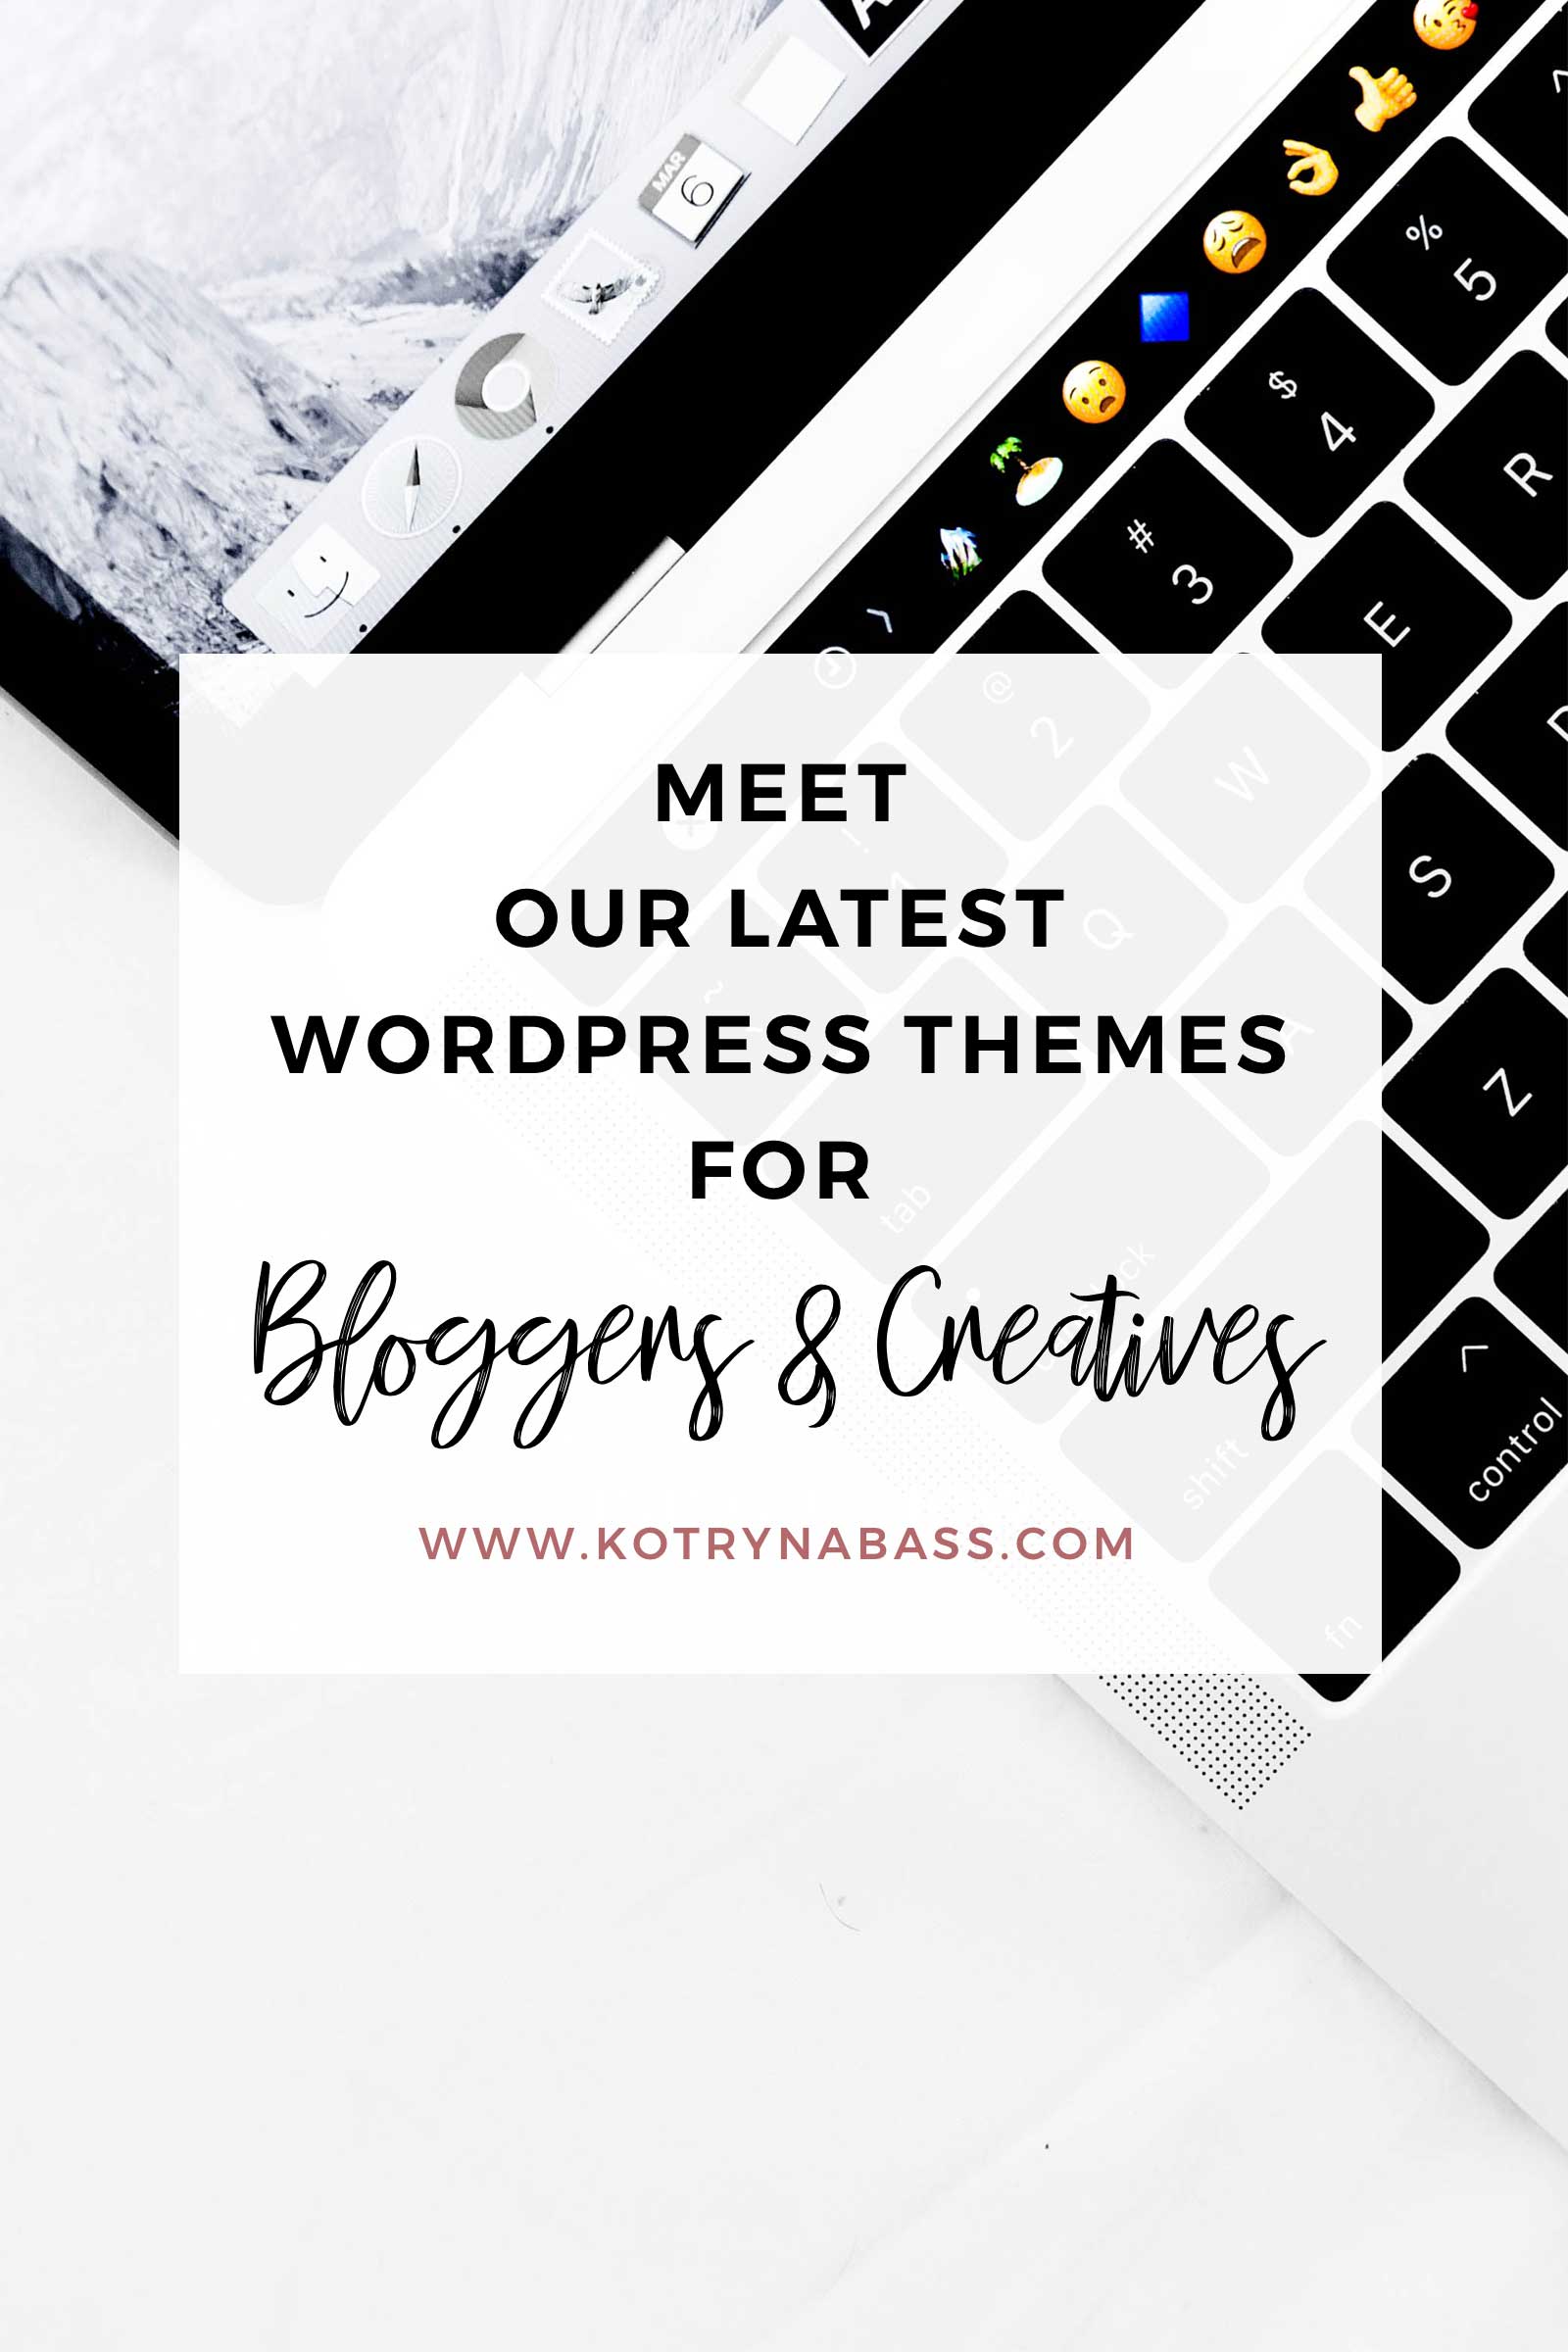 Over the last week, we've introduced three brand new WordPress themes on our website and the feedback has been astonishing. I wanted to introduce each of them here on the blog & I hope these make your creative online life a bit easier!